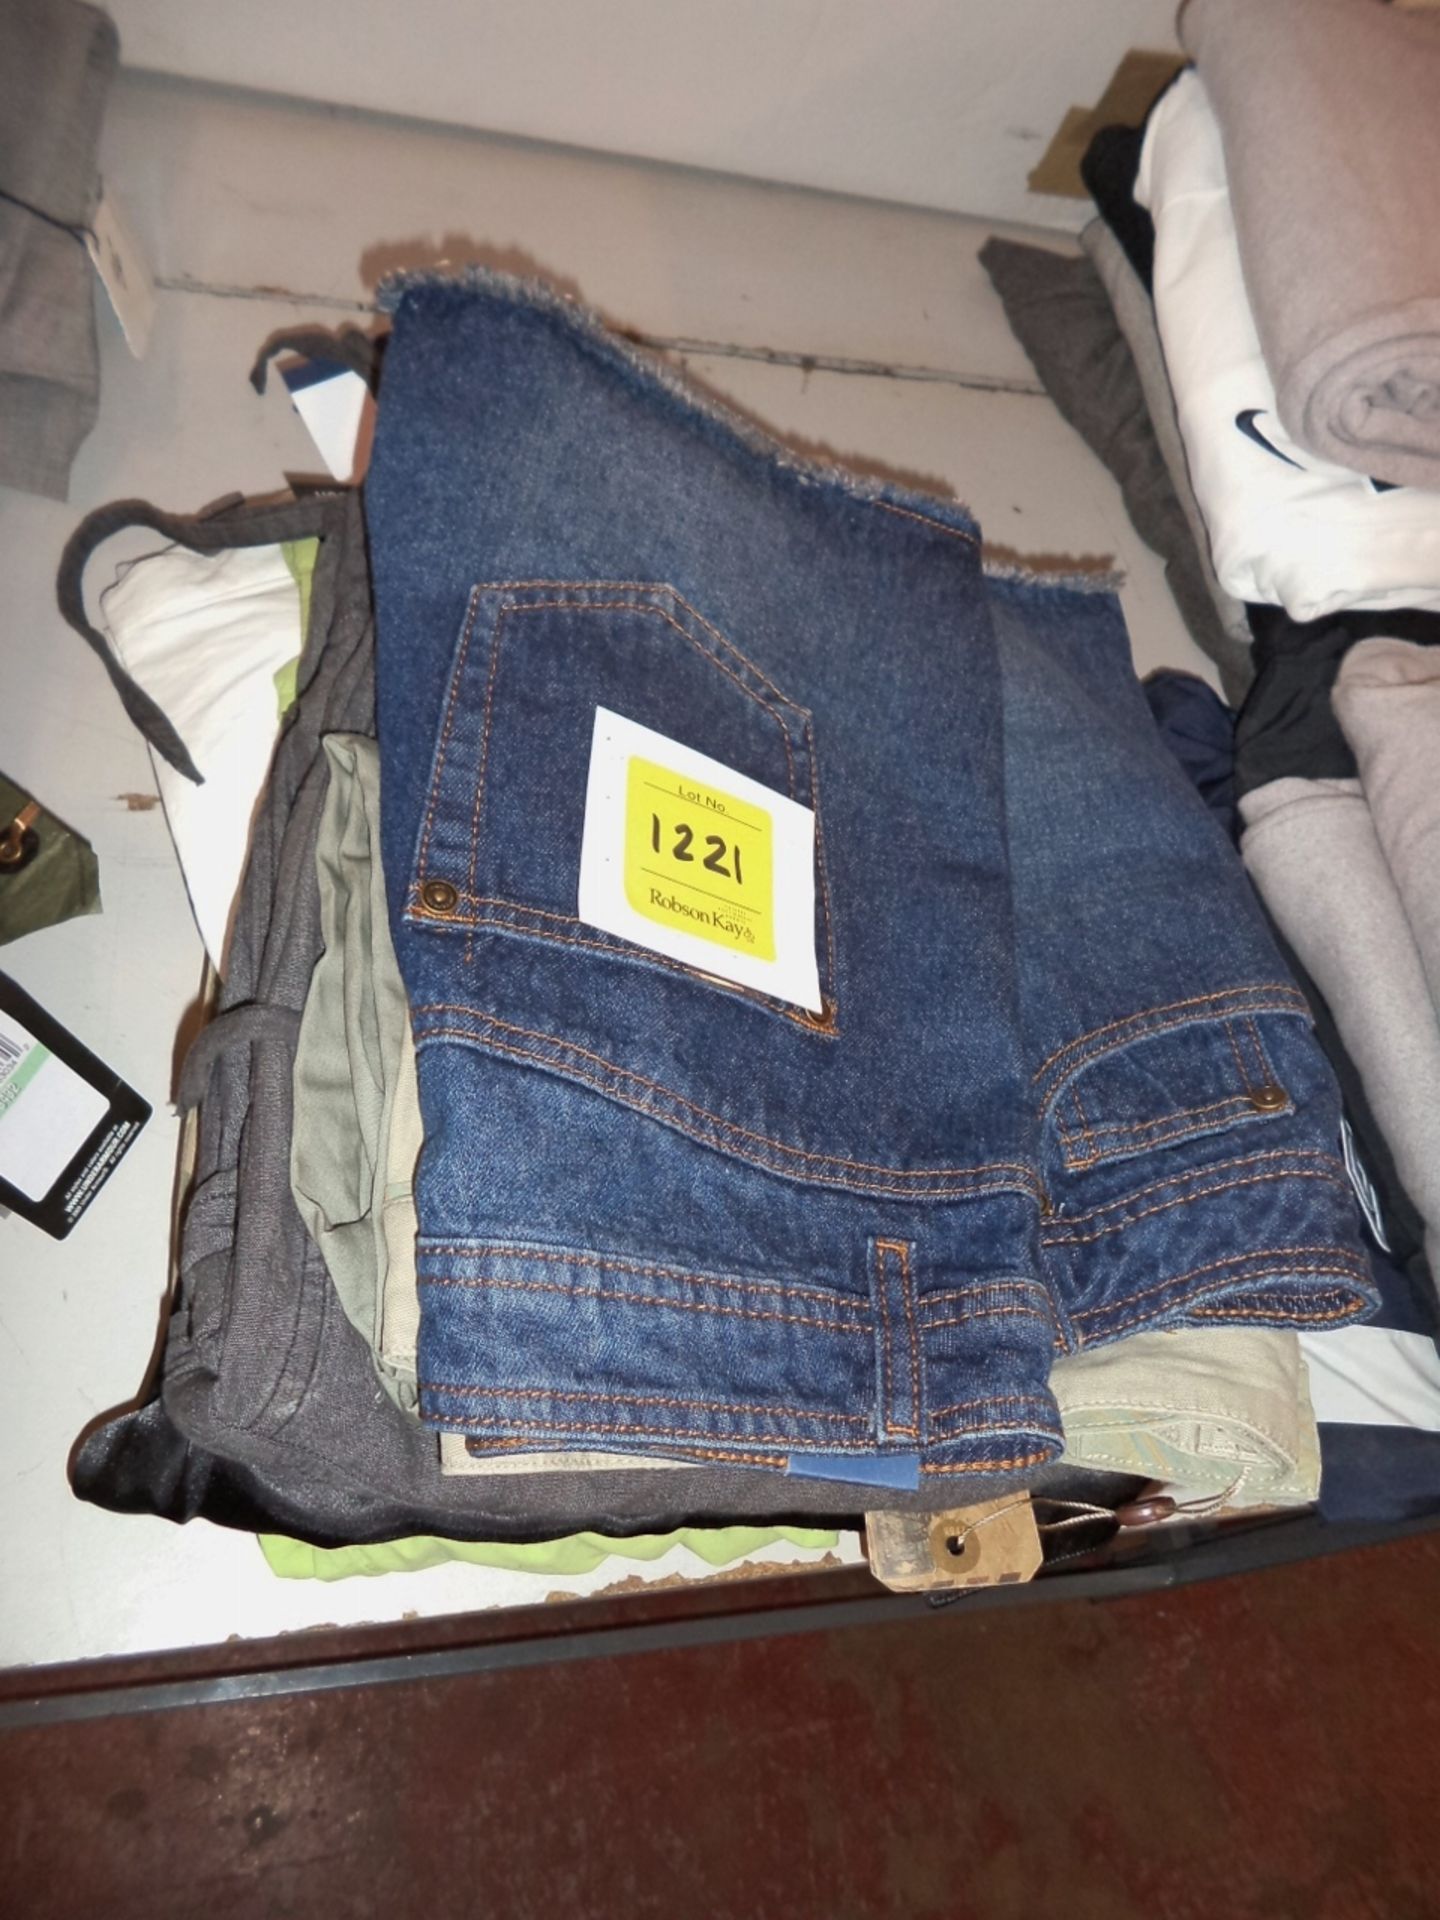 8 off assorted shorts and 3/4 length jeans, cotton shorts, canvas pants and similar